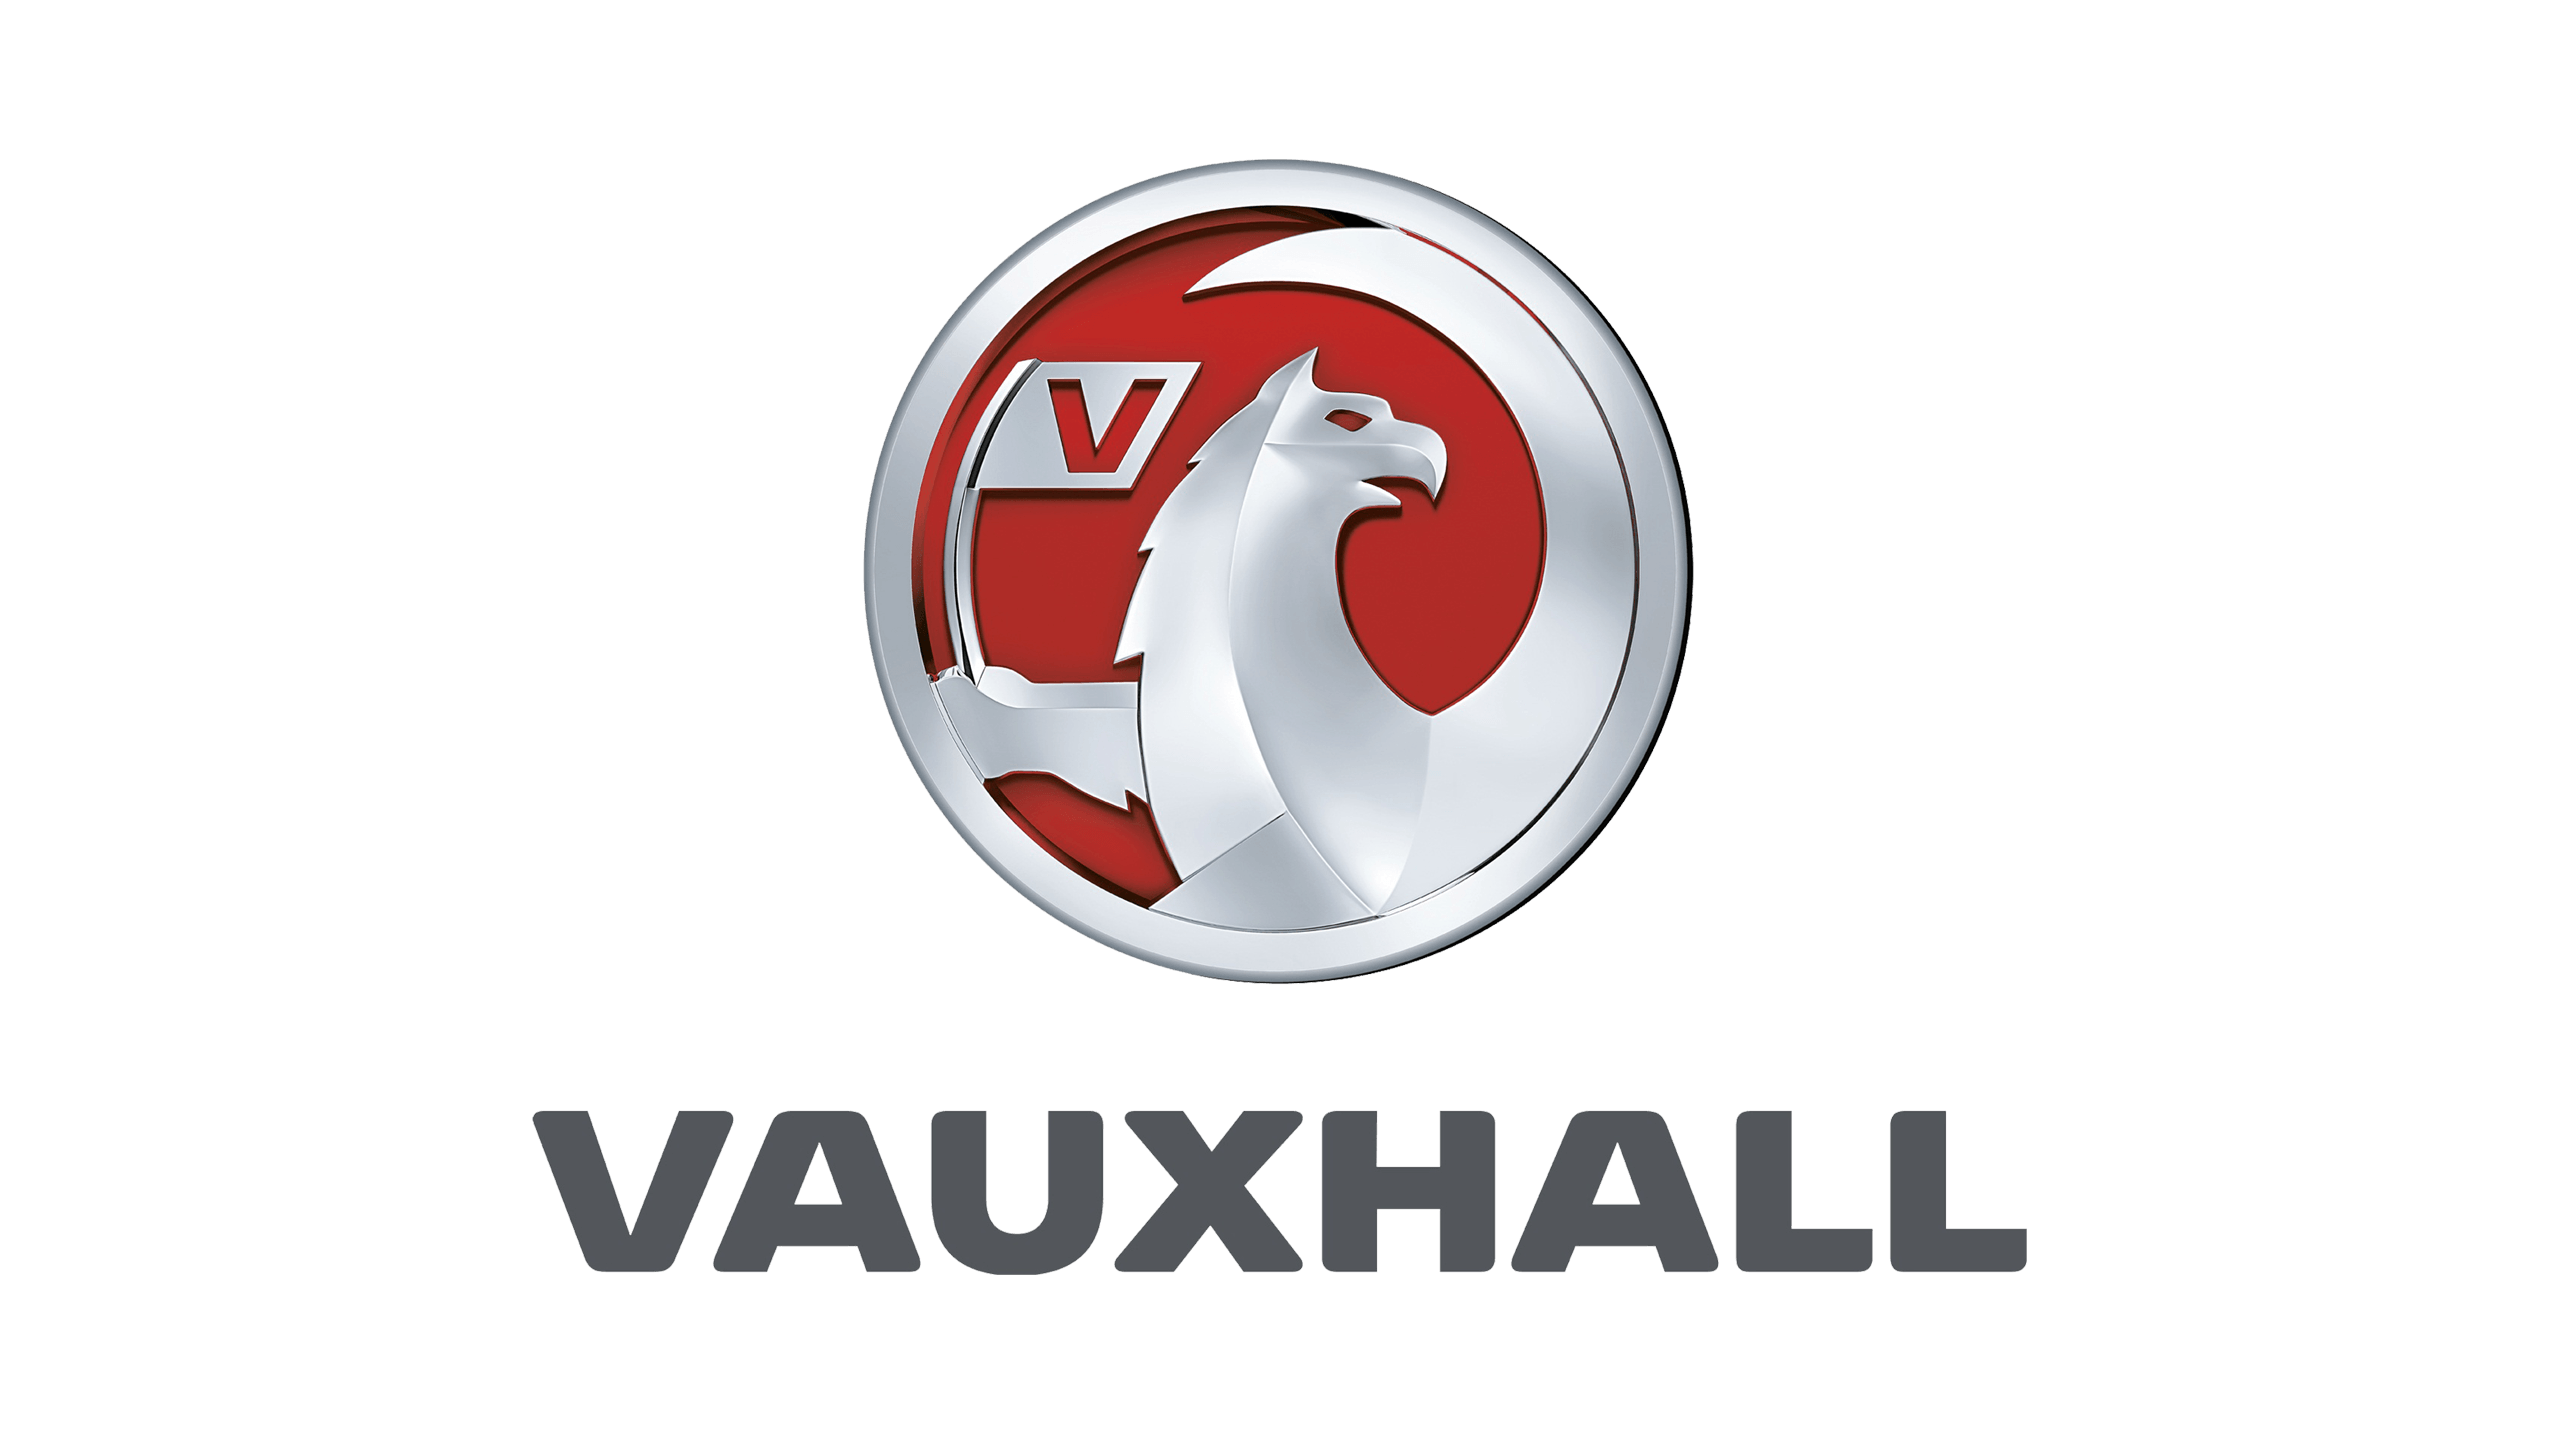 Vauxhall Logo - Vauxhall Logo, HD Png, Meaning, Information